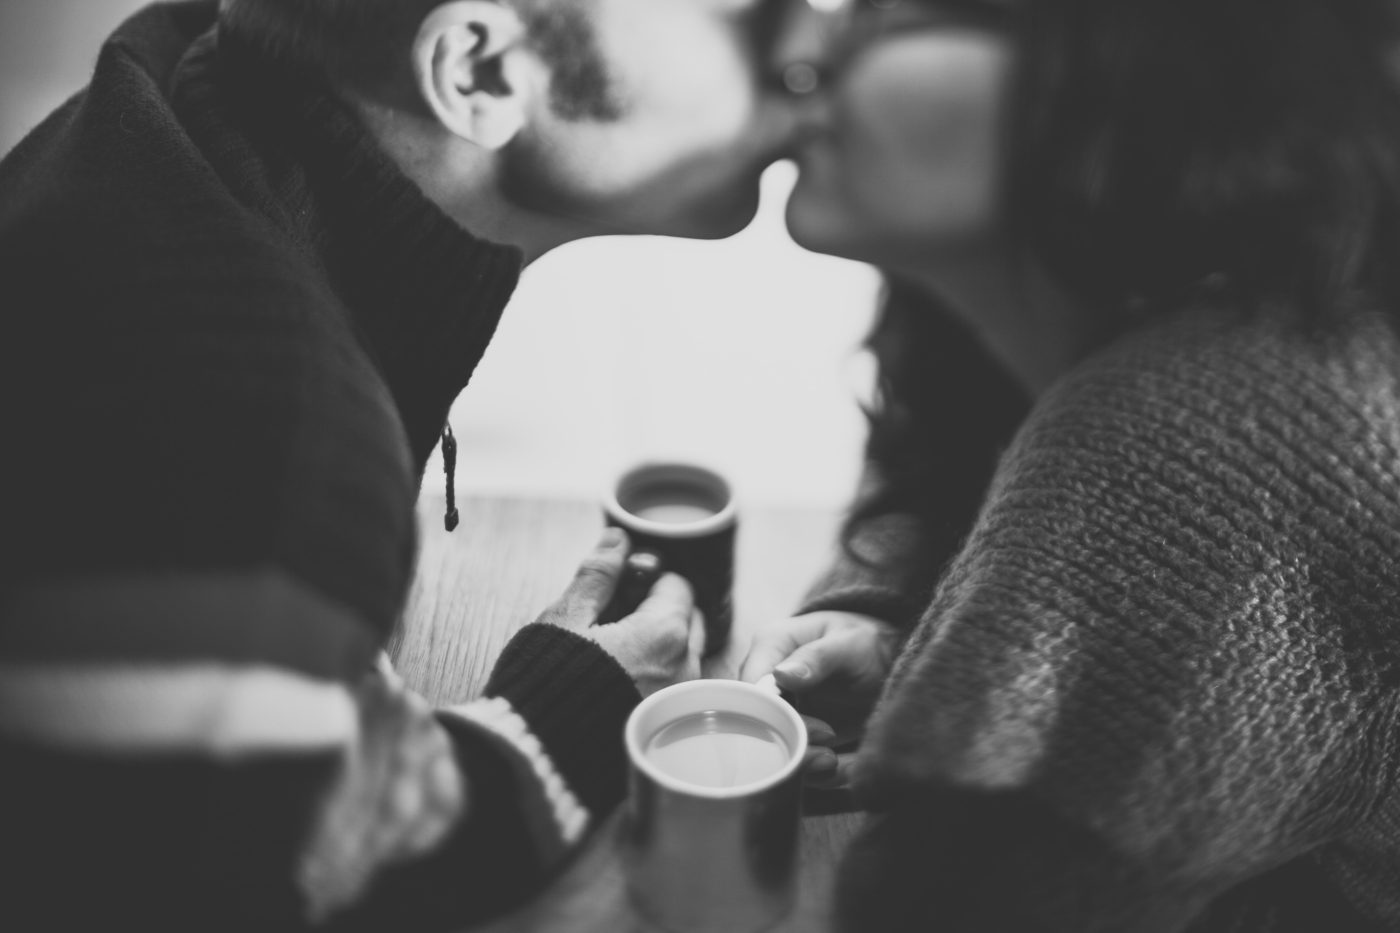 I had an affair and I don't regret it